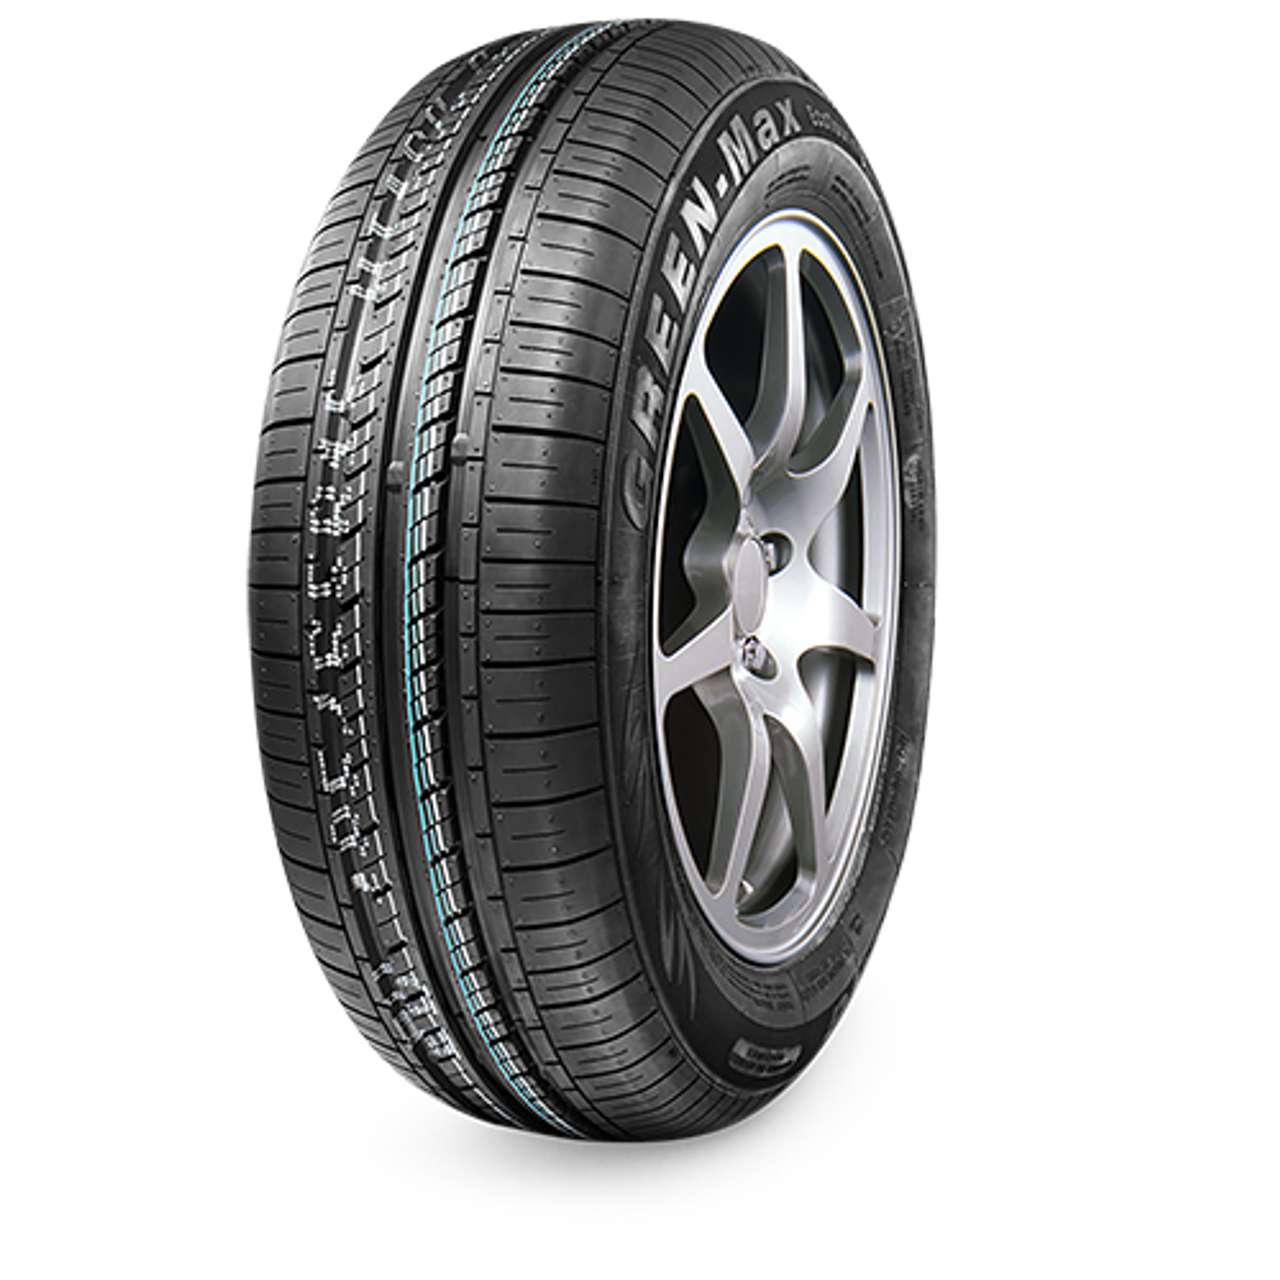 LINGLONG GREEN-MAX ECOTOURING 165/70R14 81T BSW von LINGLONG